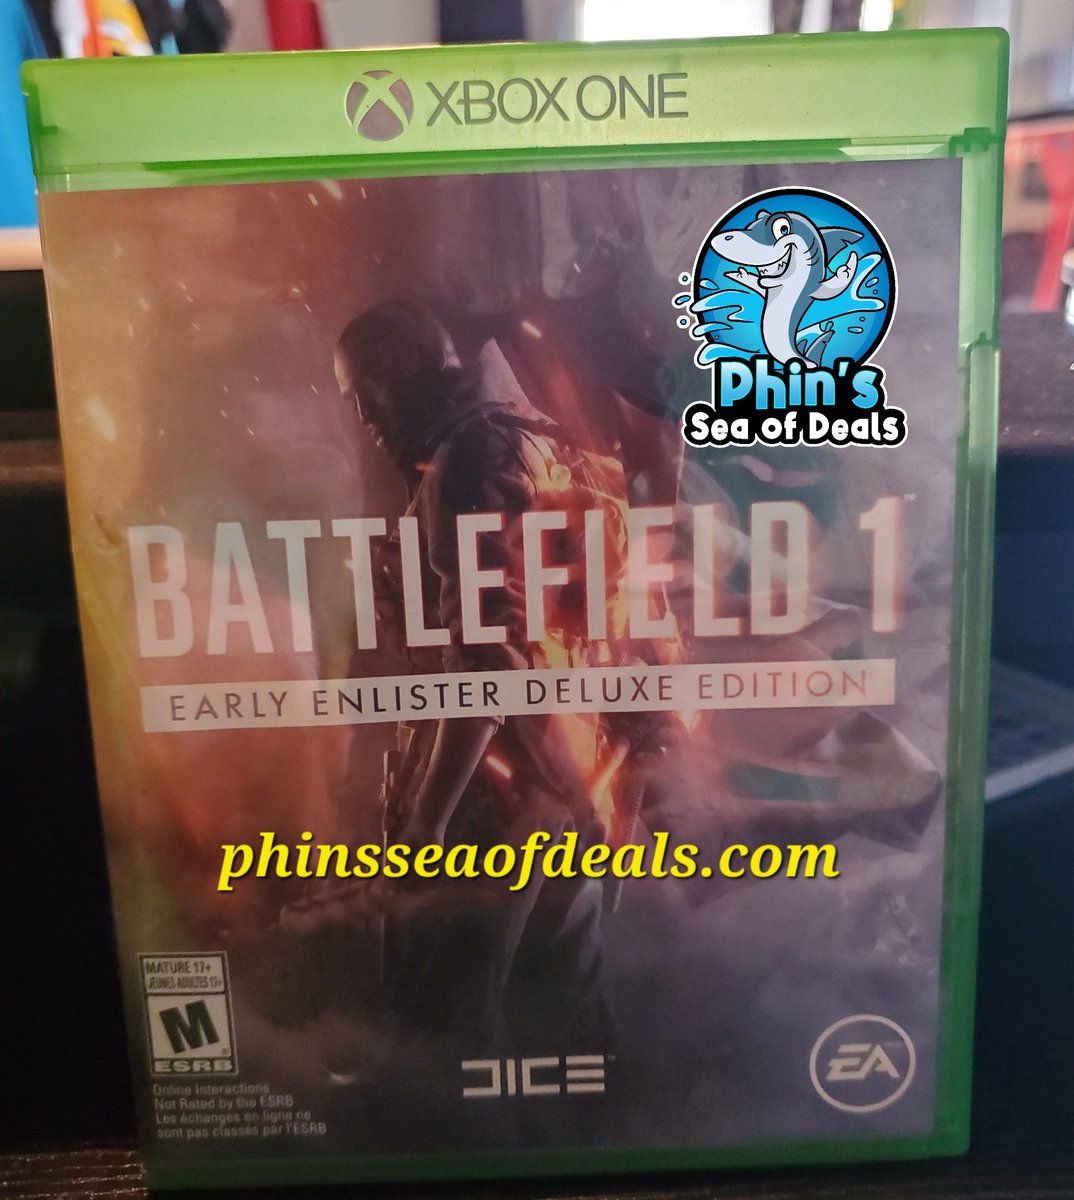 Battlefield 1 Early Enlister Deluxe Edition
No instruction manual 

Phinsseaofdeals.com 

#xboxone #xbox #battlefield1 #xboxbattlefield #videogames #Phinsseaofdeals #xboxgamer #xboxgaming #washingtonpa #washingtoncountypa #mcmurraypa #pittsburghsmallbusiness #microsoft